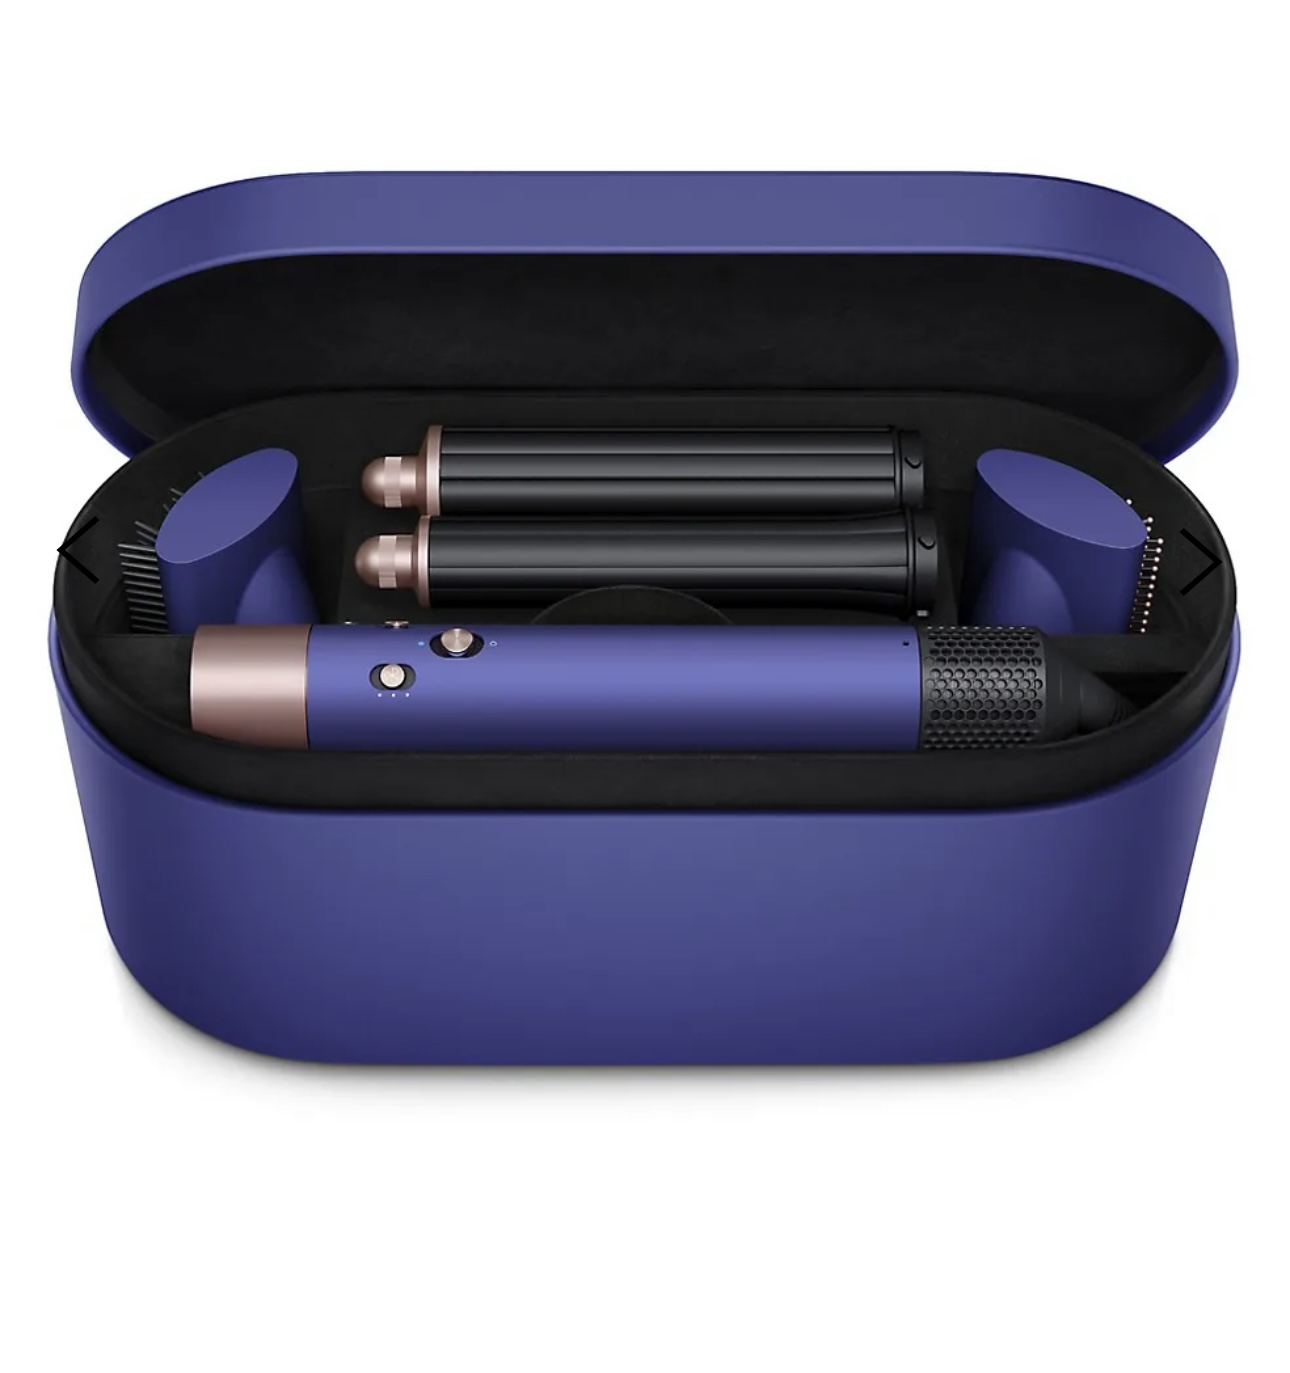 The Dyson Airwrap hair styling tool